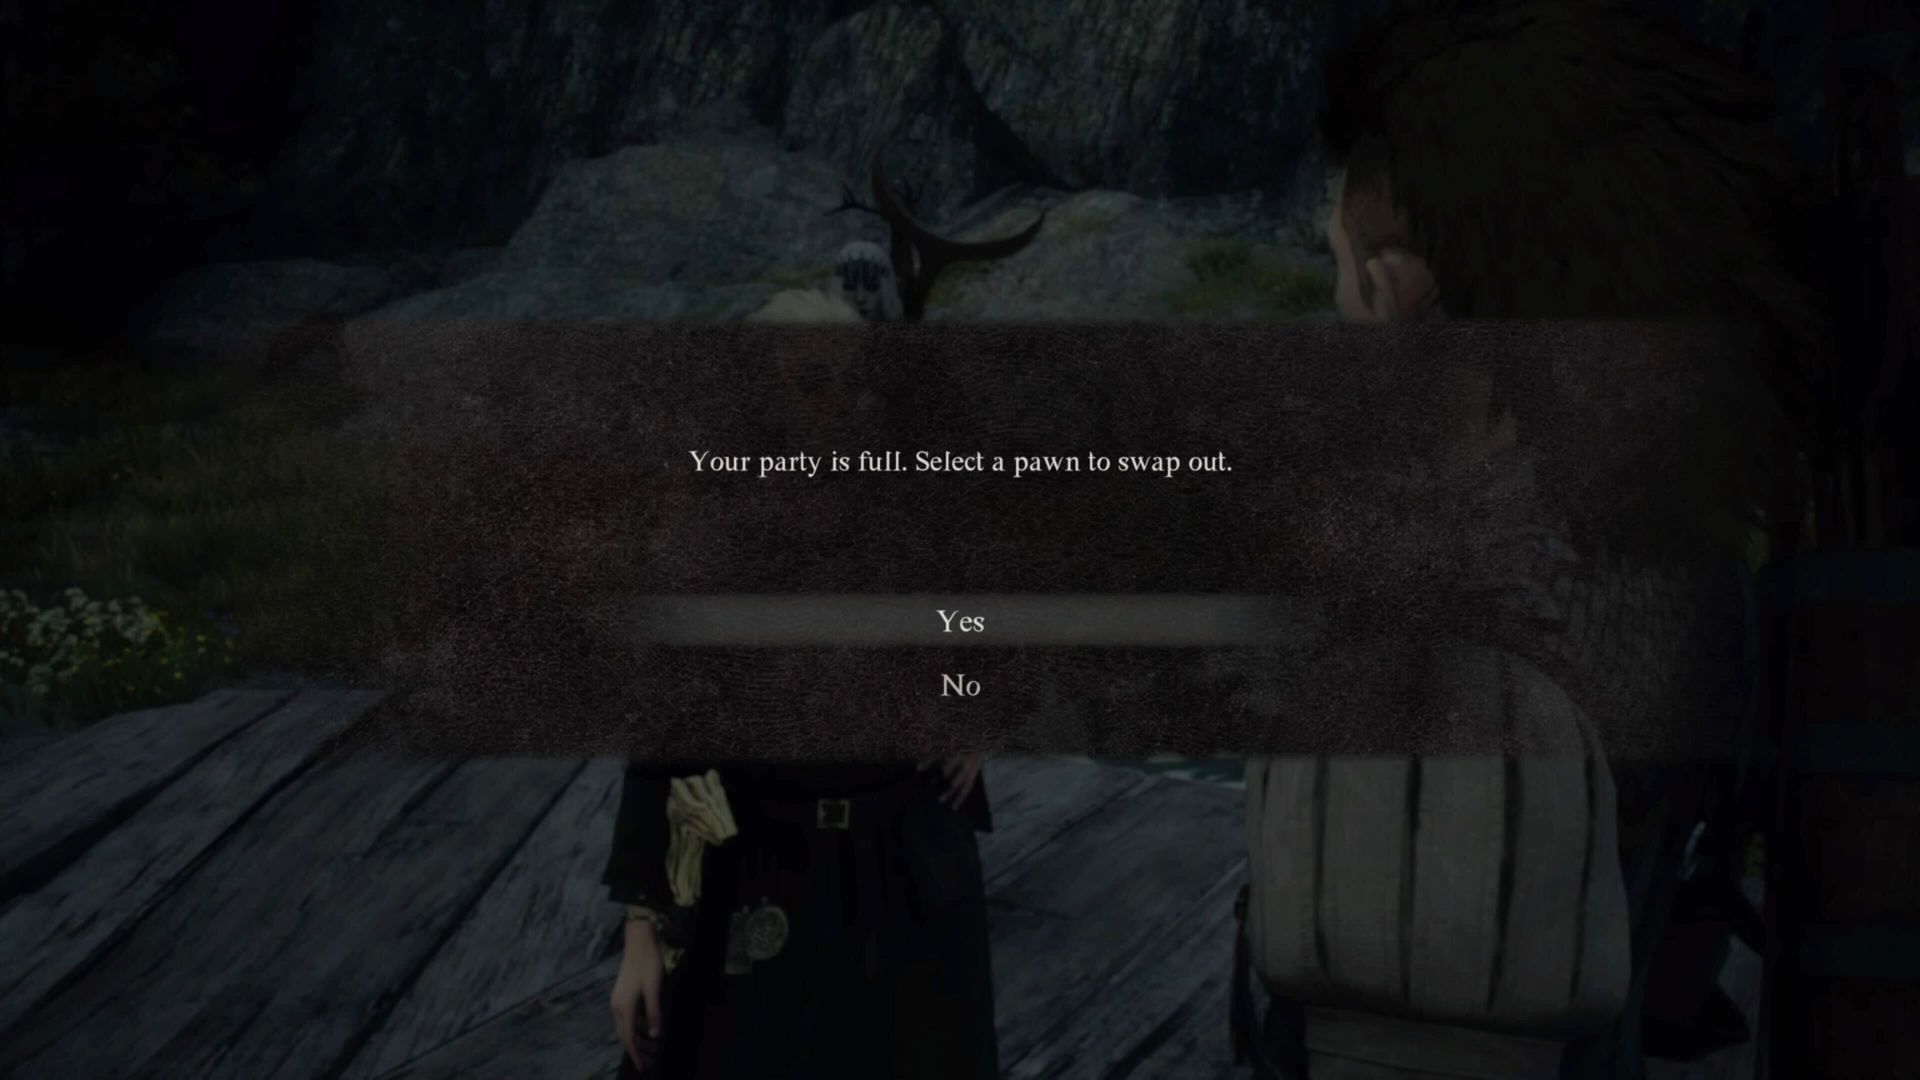 A notice in Dragon's Dogma 2 telling the player that their party is full